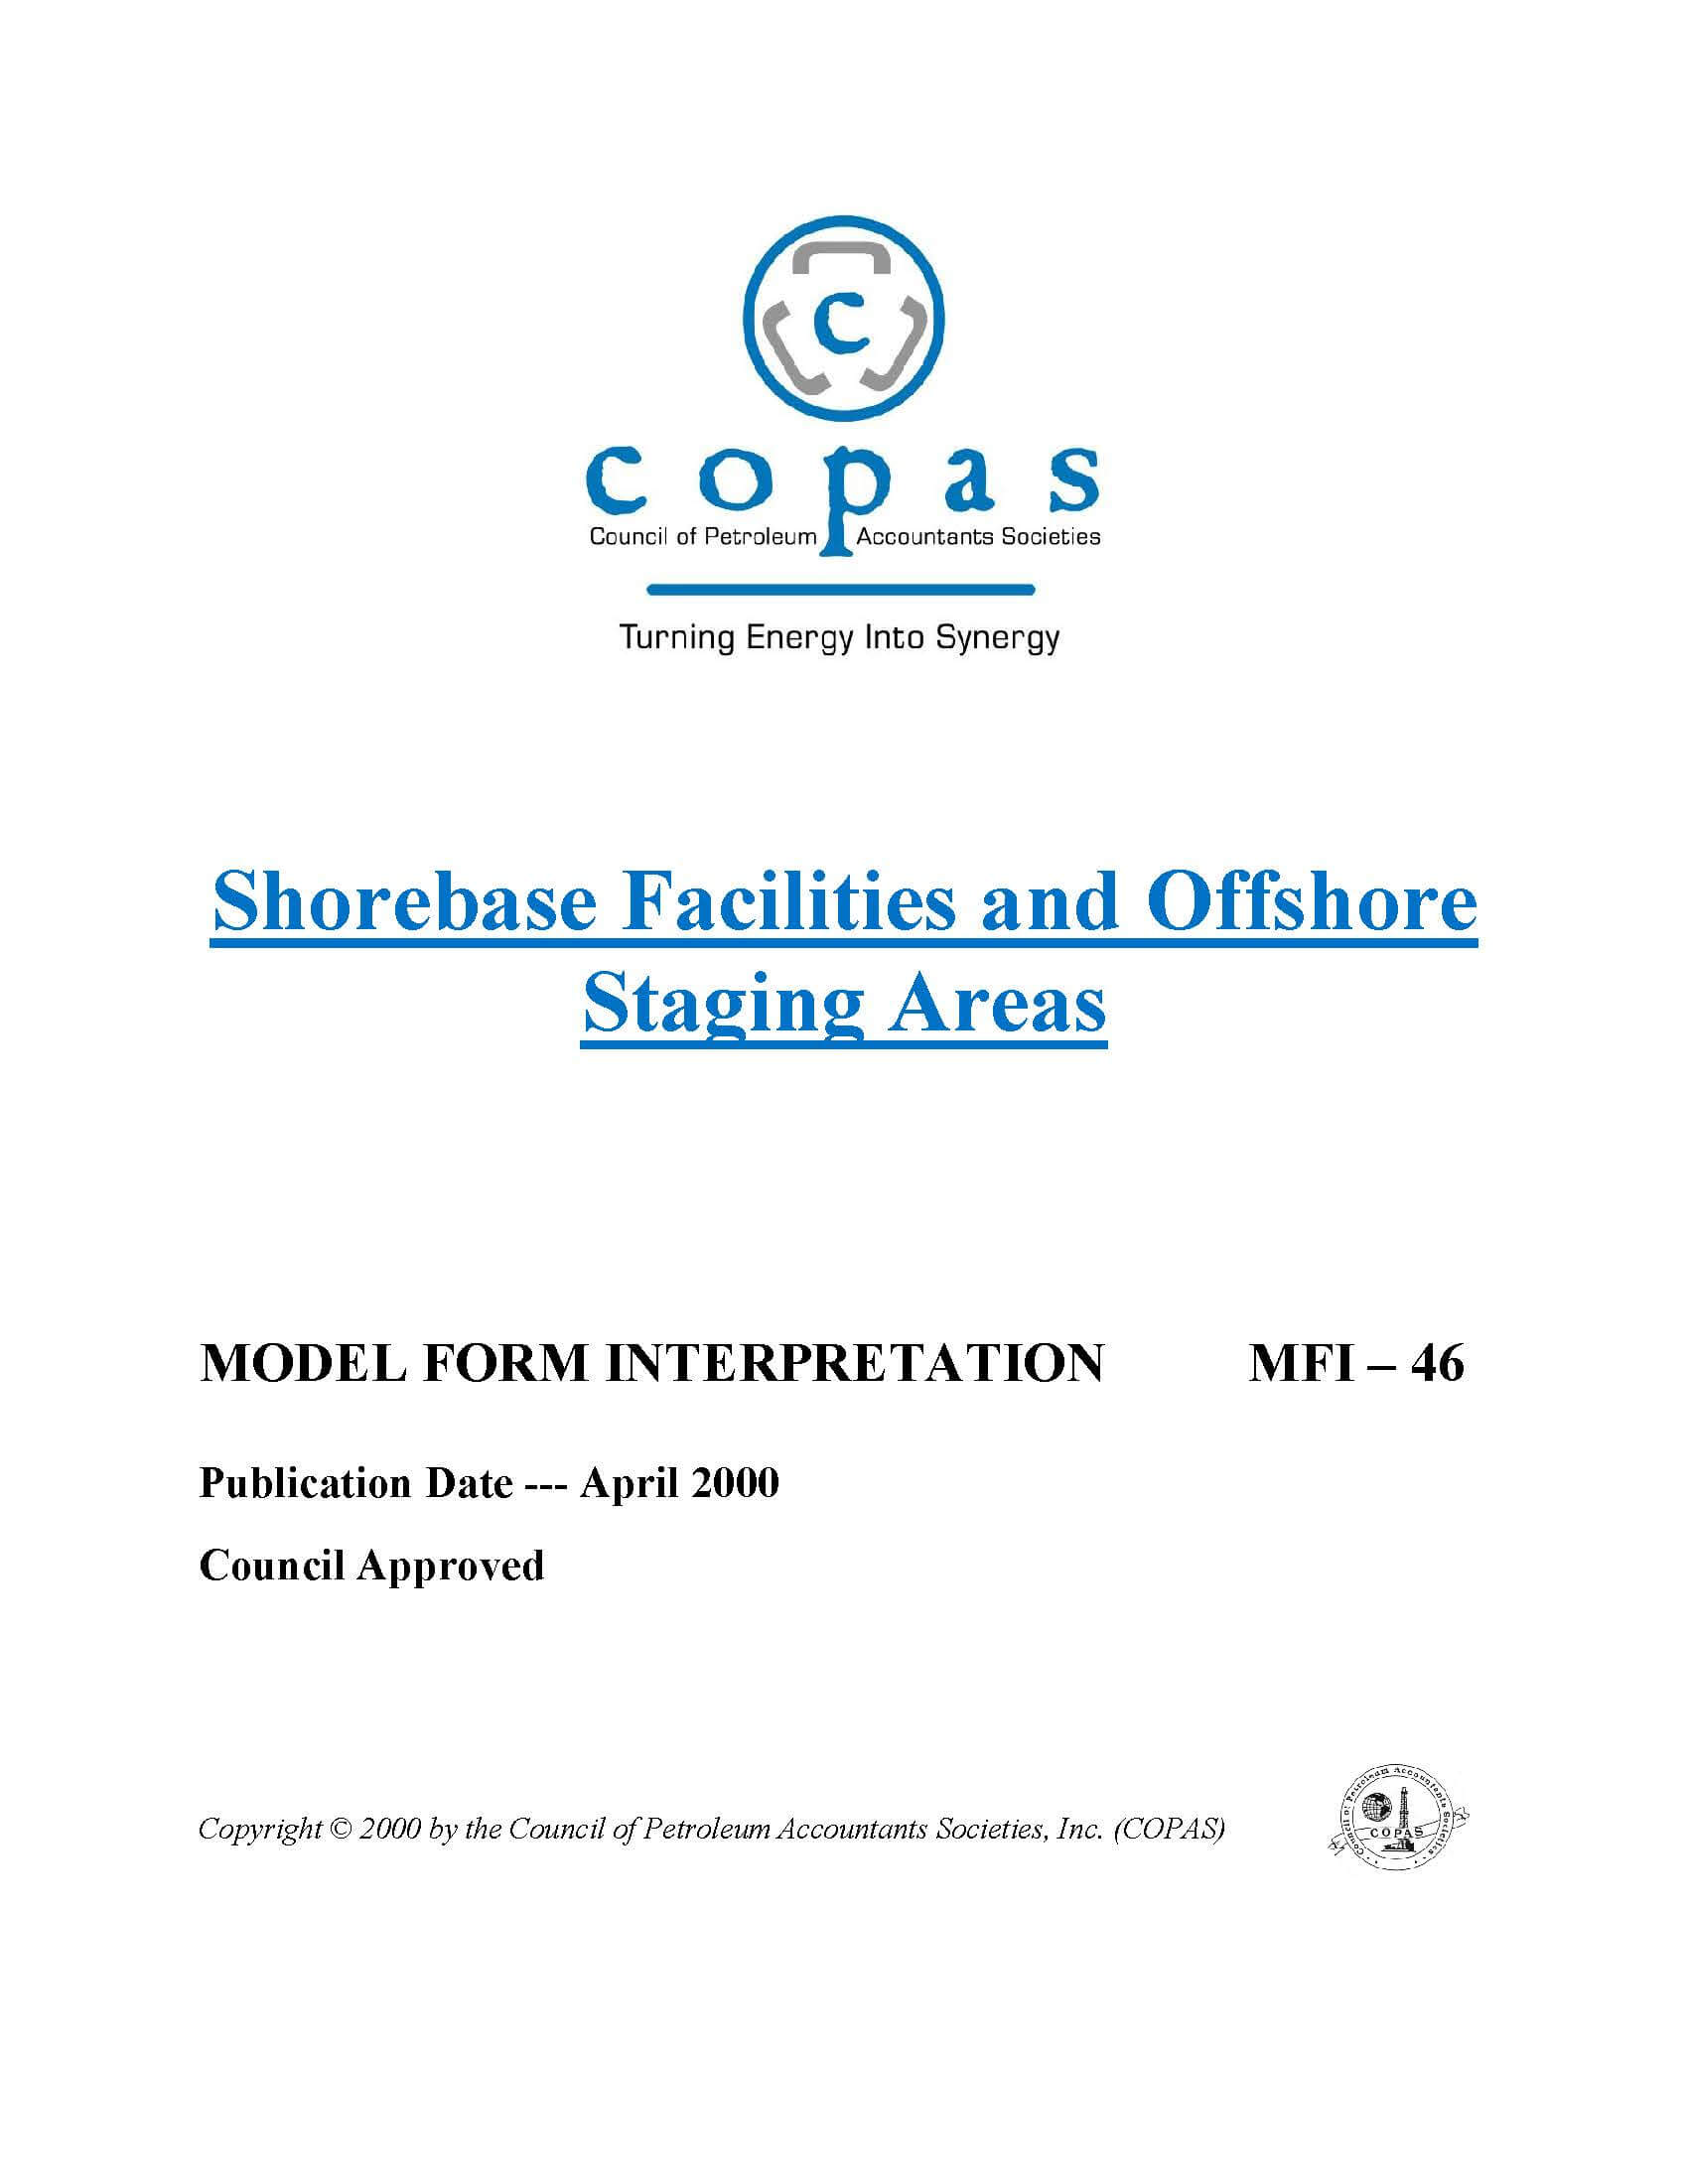 MFI-46 Shorebase Facilities and Offshore Staging Areas